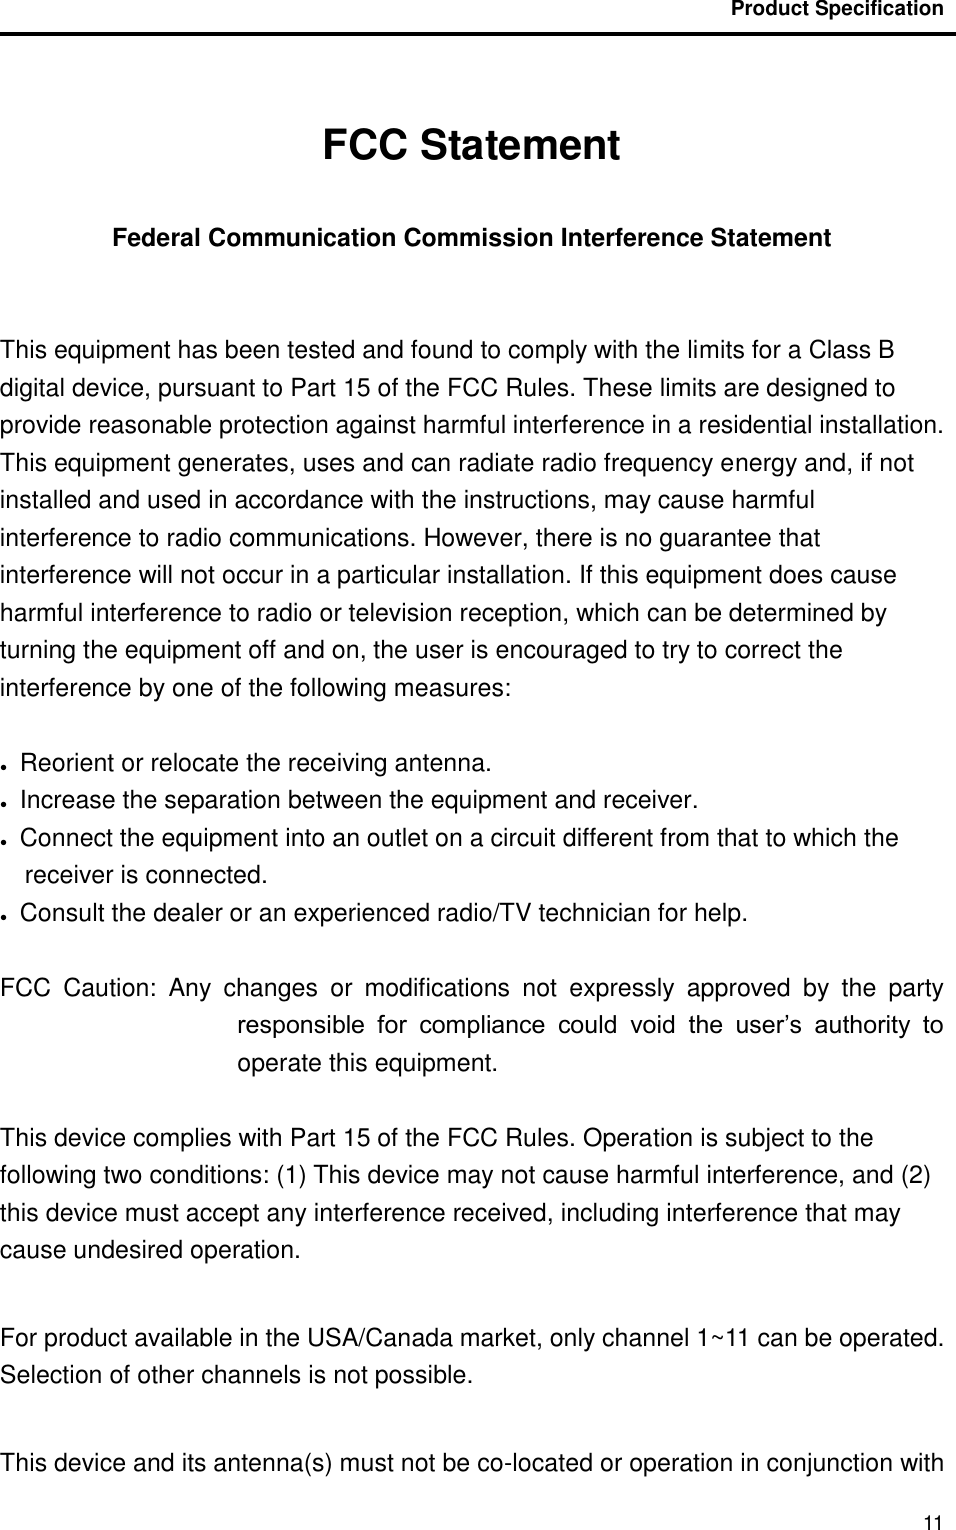                                           Product Specification                                               11  FCC Statement  Federal Communication Commission Interference Statement    This equipment has been tested and found to comply with the limits for a Class B digital device, pursuant to Part 15 of the FCC Rules. These limits are designed to provide reasonable protection against harmful interference in a residential installation. This equipment generates, uses and can radiate radio frequency energy and, if not installed and used in accordance with the instructions, may cause harmful interference to radio communications. However, there is no guarantee that interference will not occur in a particular installation. If this equipment does cause harmful interference to radio or television reception, which can be determined by turning the equipment off and on, the user is encouraged to try to correct the interference by one of the following measures:  ●    Reorient or relocate the receiving antenna. ●    Increase the separation between the equipment and receiver. ●    Connect the equipment into an outlet on a circuit different from that to which the receiver is connected. ●    Consult the dealer or an experienced radio/TV technician for help.  FCC  Caution:  Any  changes  or  modifications  not  expressly  approved  by  the  party responsible  for  compliance  could  void  the  user’s  authority  to operate this equipment.  This device complies with Part 15 of the FCC Rules. Operation is subject to the following two conditions: (1) This device may not cause harmful interference, and (2) this device must accept any interference received, including interference that may cause undesired operation.  For product available in the USA/Canada market, only channel 1~11 can be operated. Selection of other channels is not possible.  This device and its antenna(s) must not be co-located or operation in conjunction with 